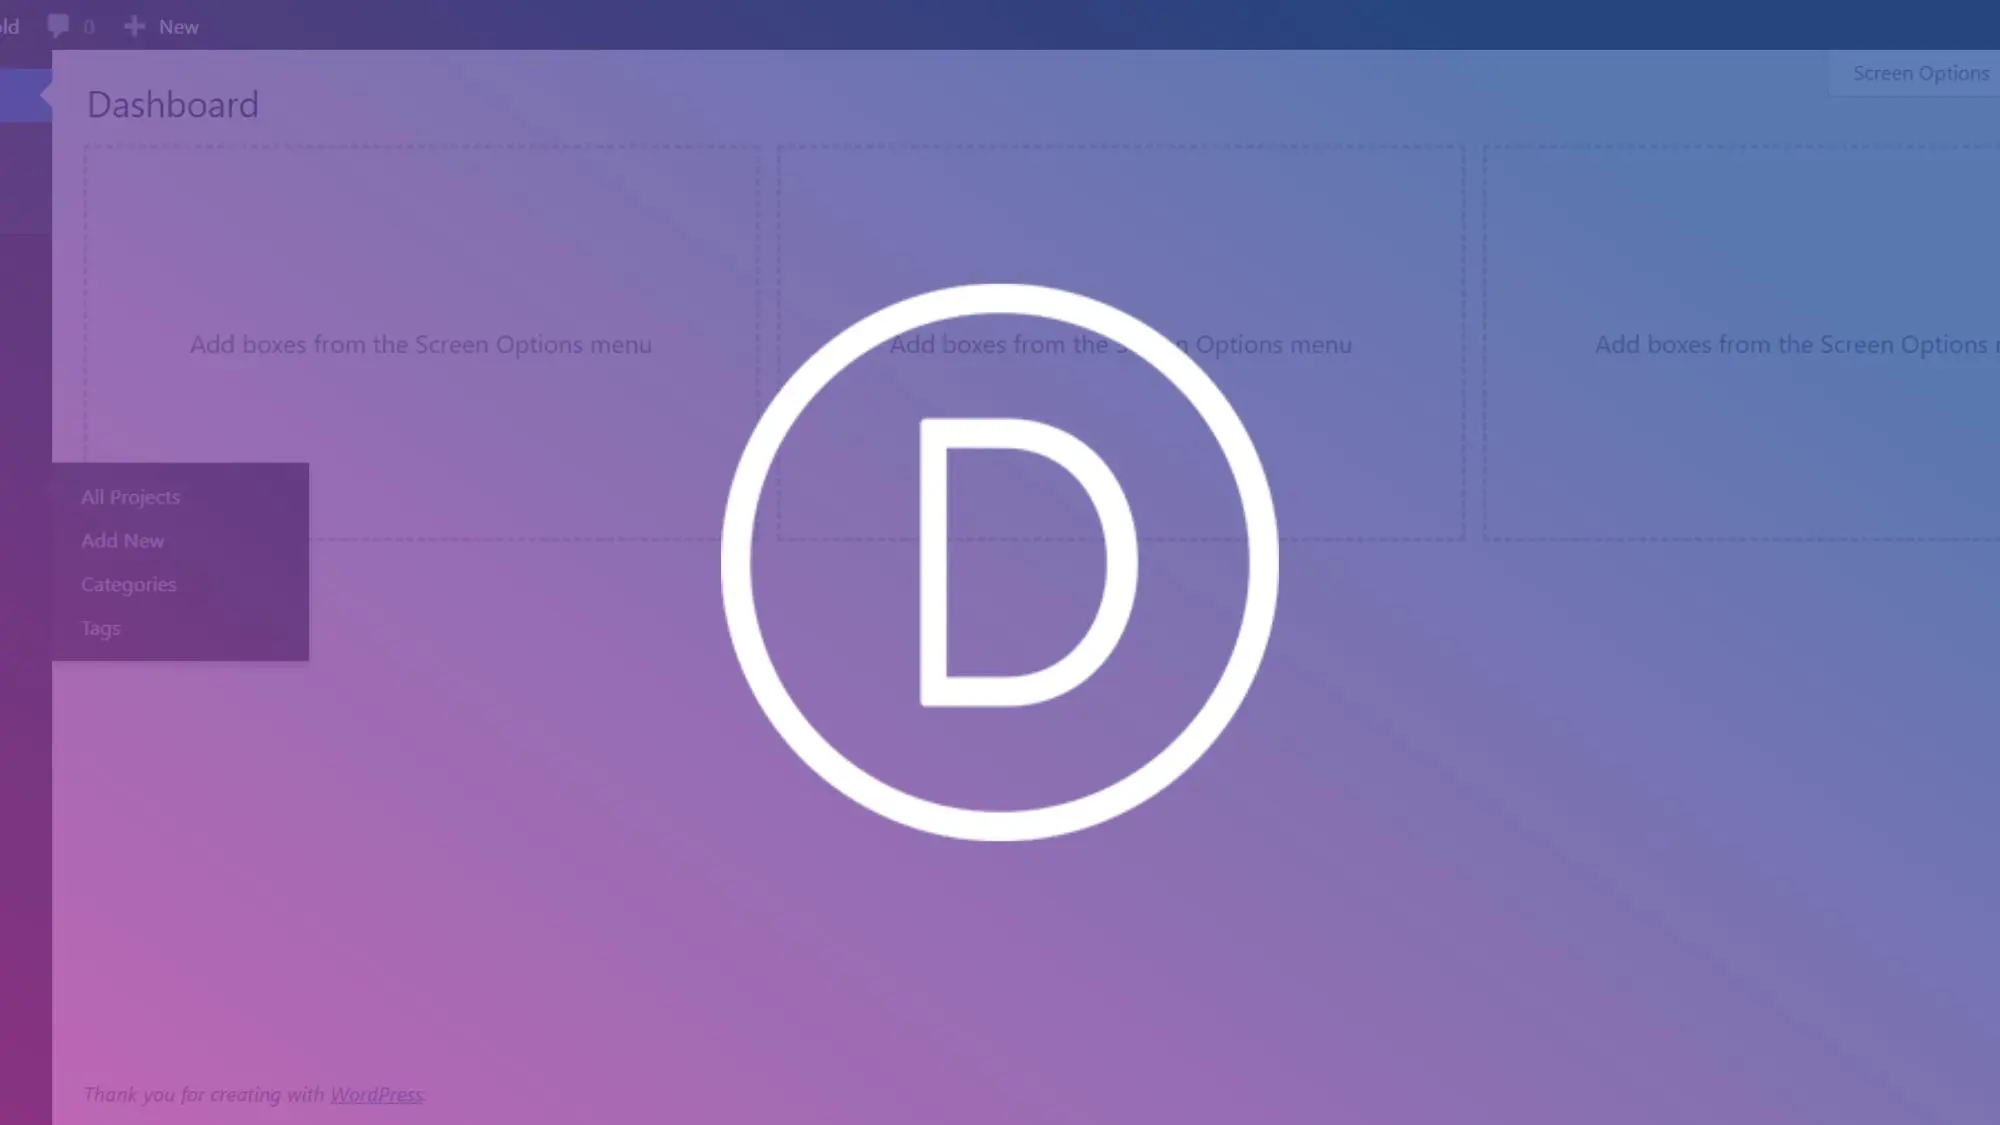 Divi logo and in the background WP dashboard with in evidence Project custom post type